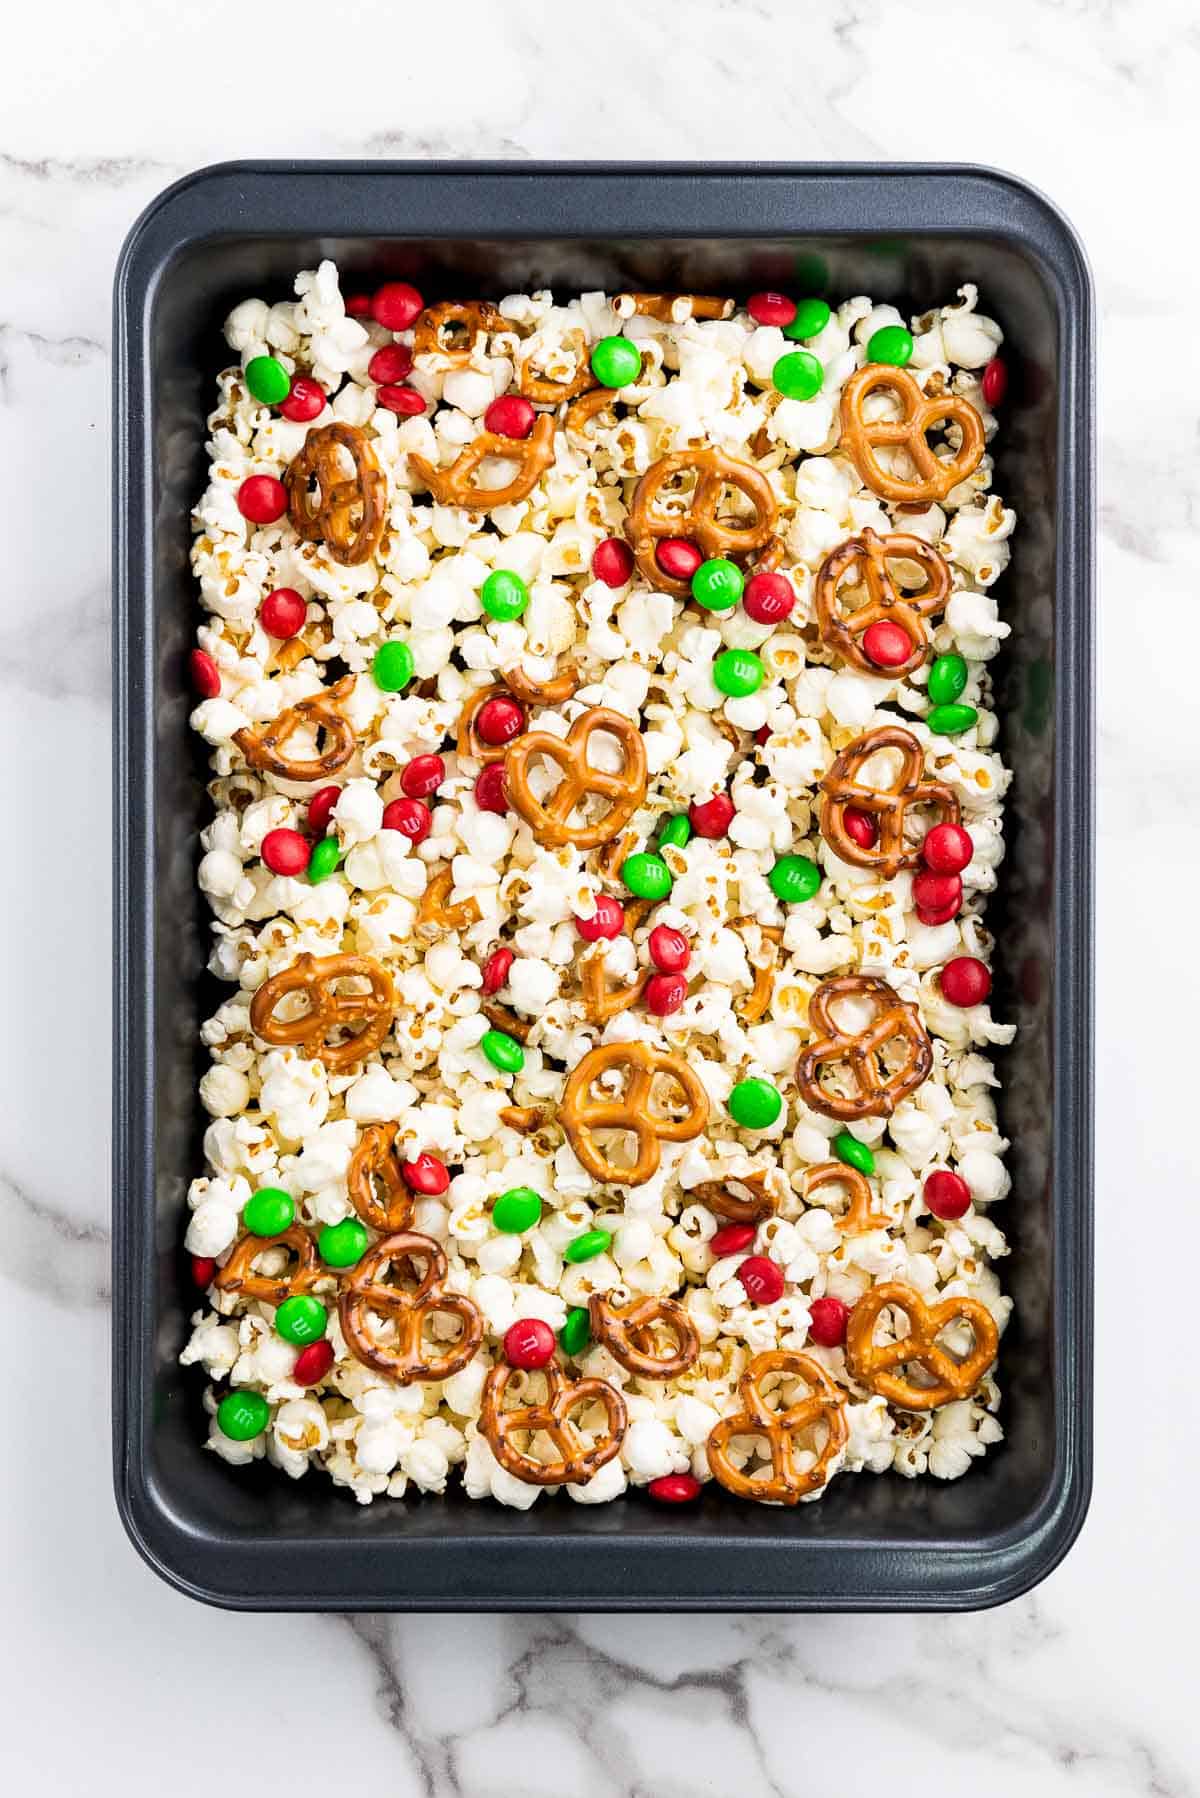 Christmas popcorn Santa munch in a black baking tray on top of a marble surface.